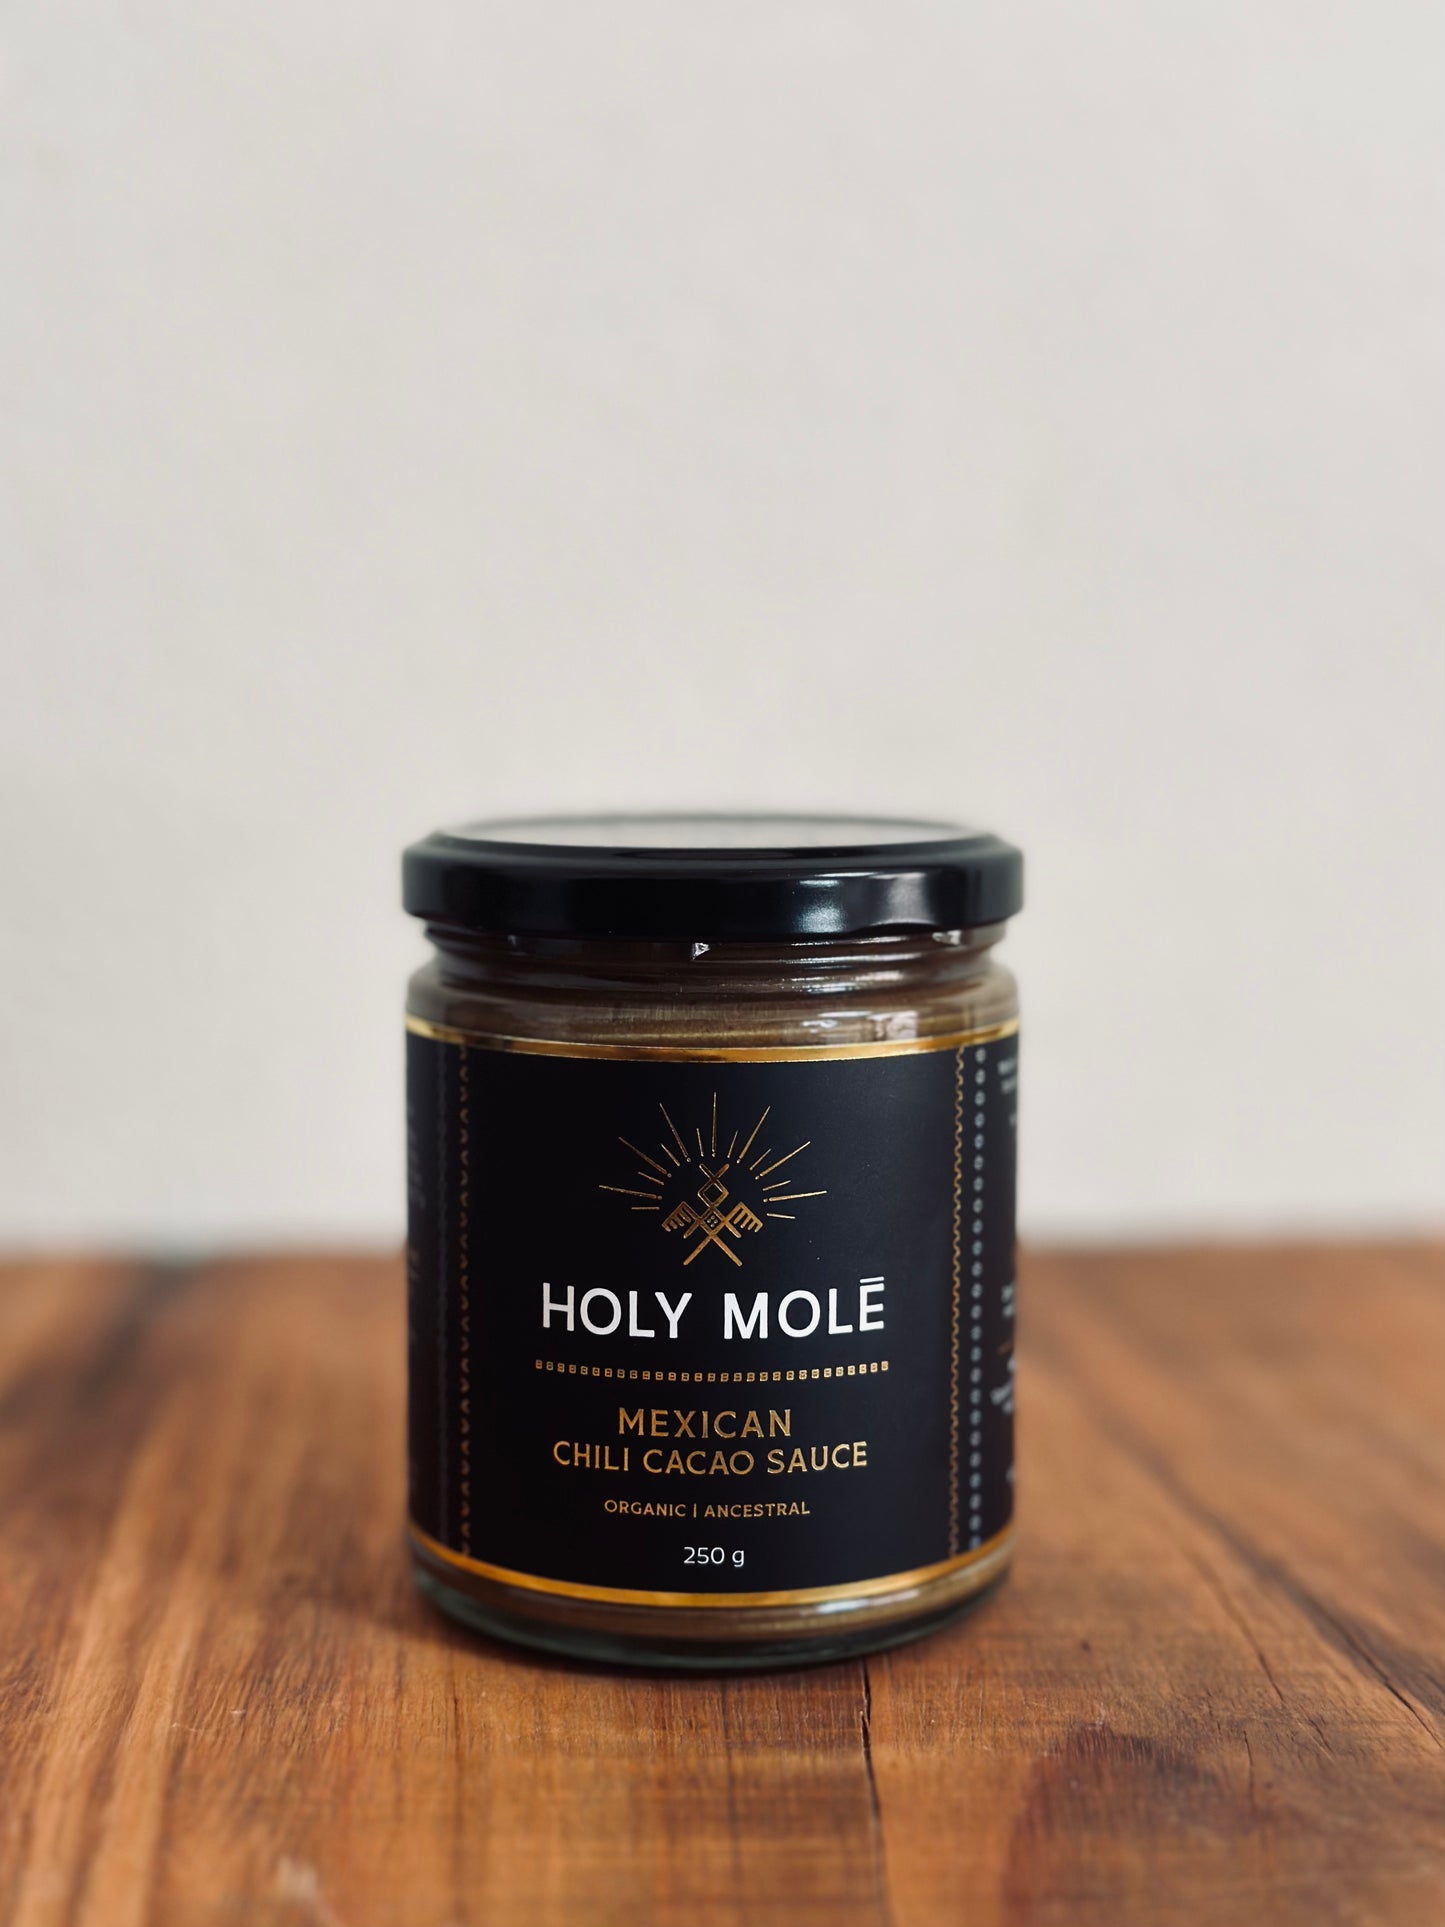 Mexican Spiced Chili Cacao Sauce, Holy Mole